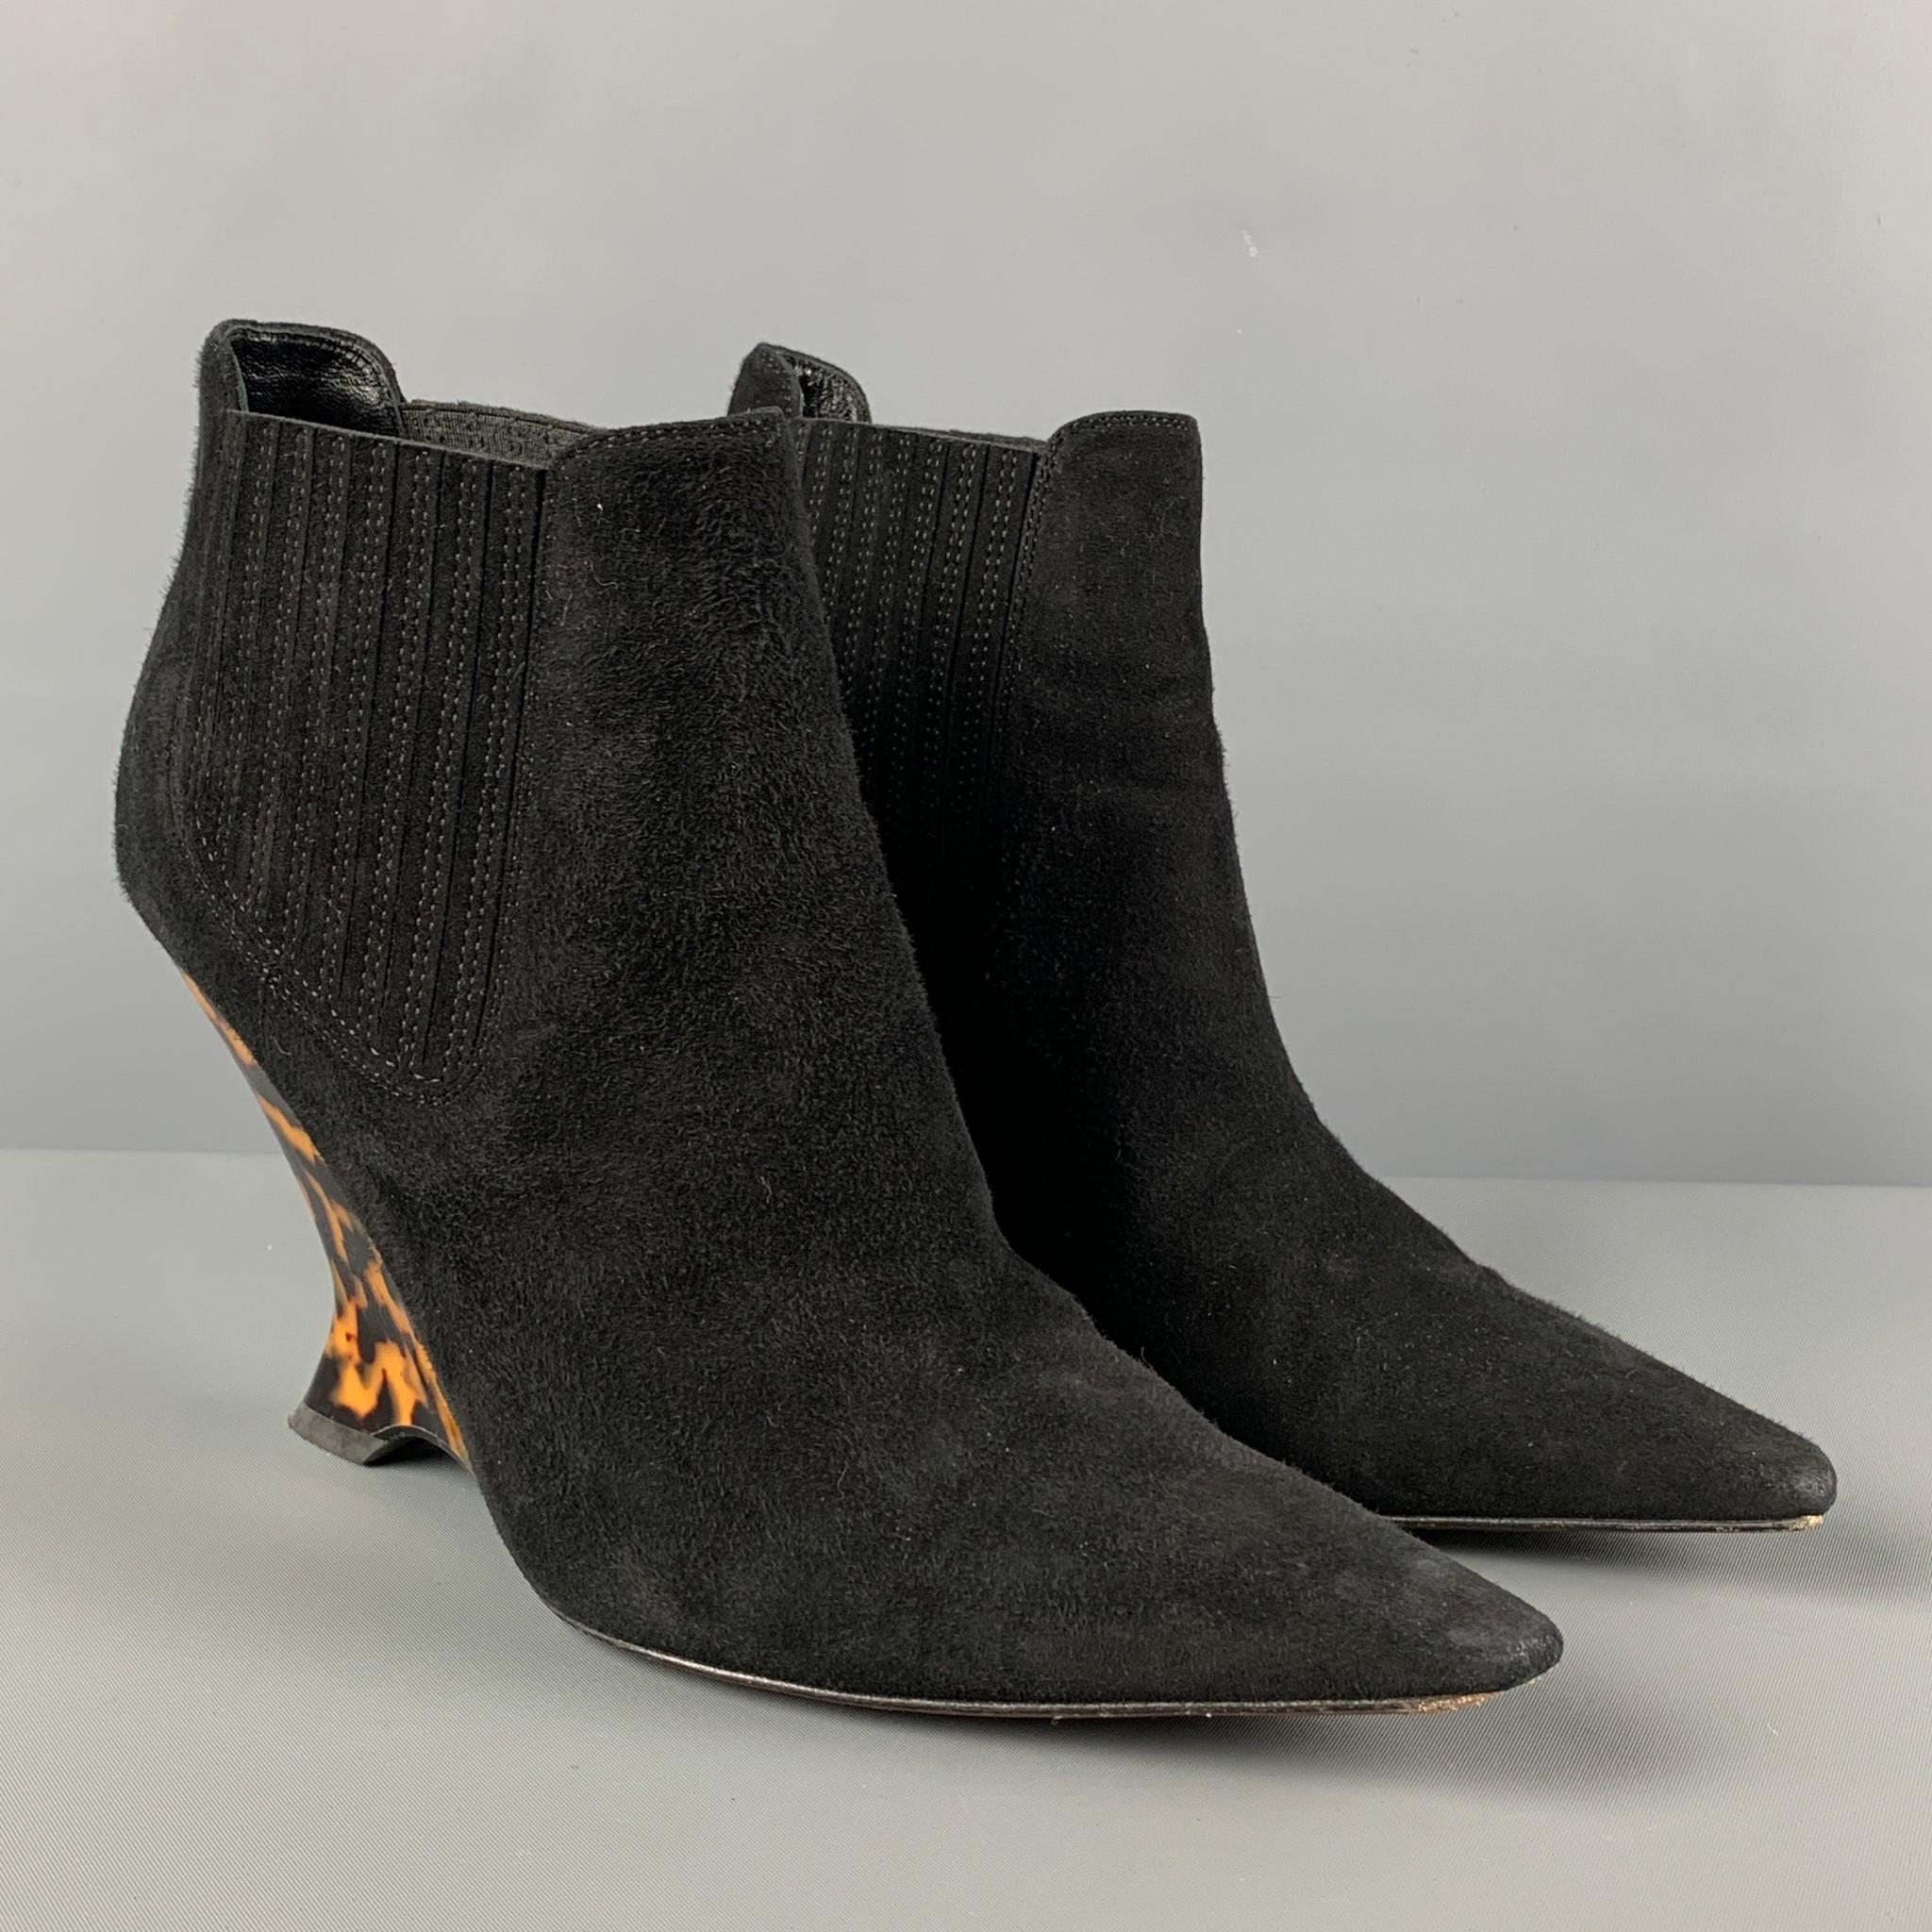 CHRISTIAN DIOR boots comes in a black suede featuring a pointed toe, stretch panel, and a tortoise shell acrylic heel.

Very Good Pre-Owned Condition.
Marked: 37.5

Measurements:

Heel: 3.75 in.